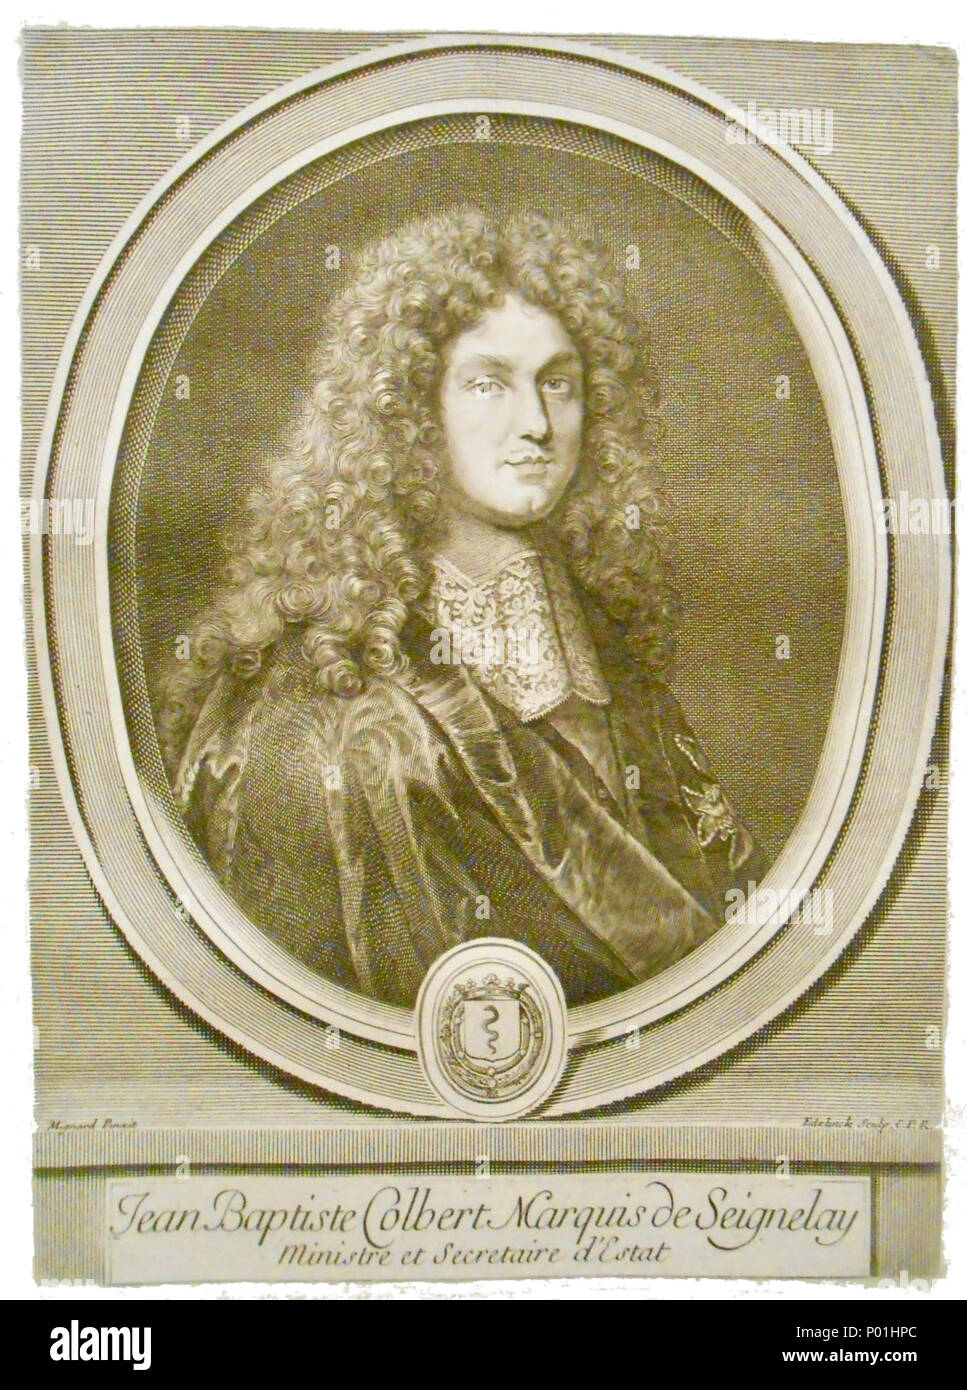 . English: A portrait of Jean Baptiste Colbert, Marquis de Seignelay, French minister of state, a print from a copper-plate engraving 8 Edelinck Colbert Stock Photo